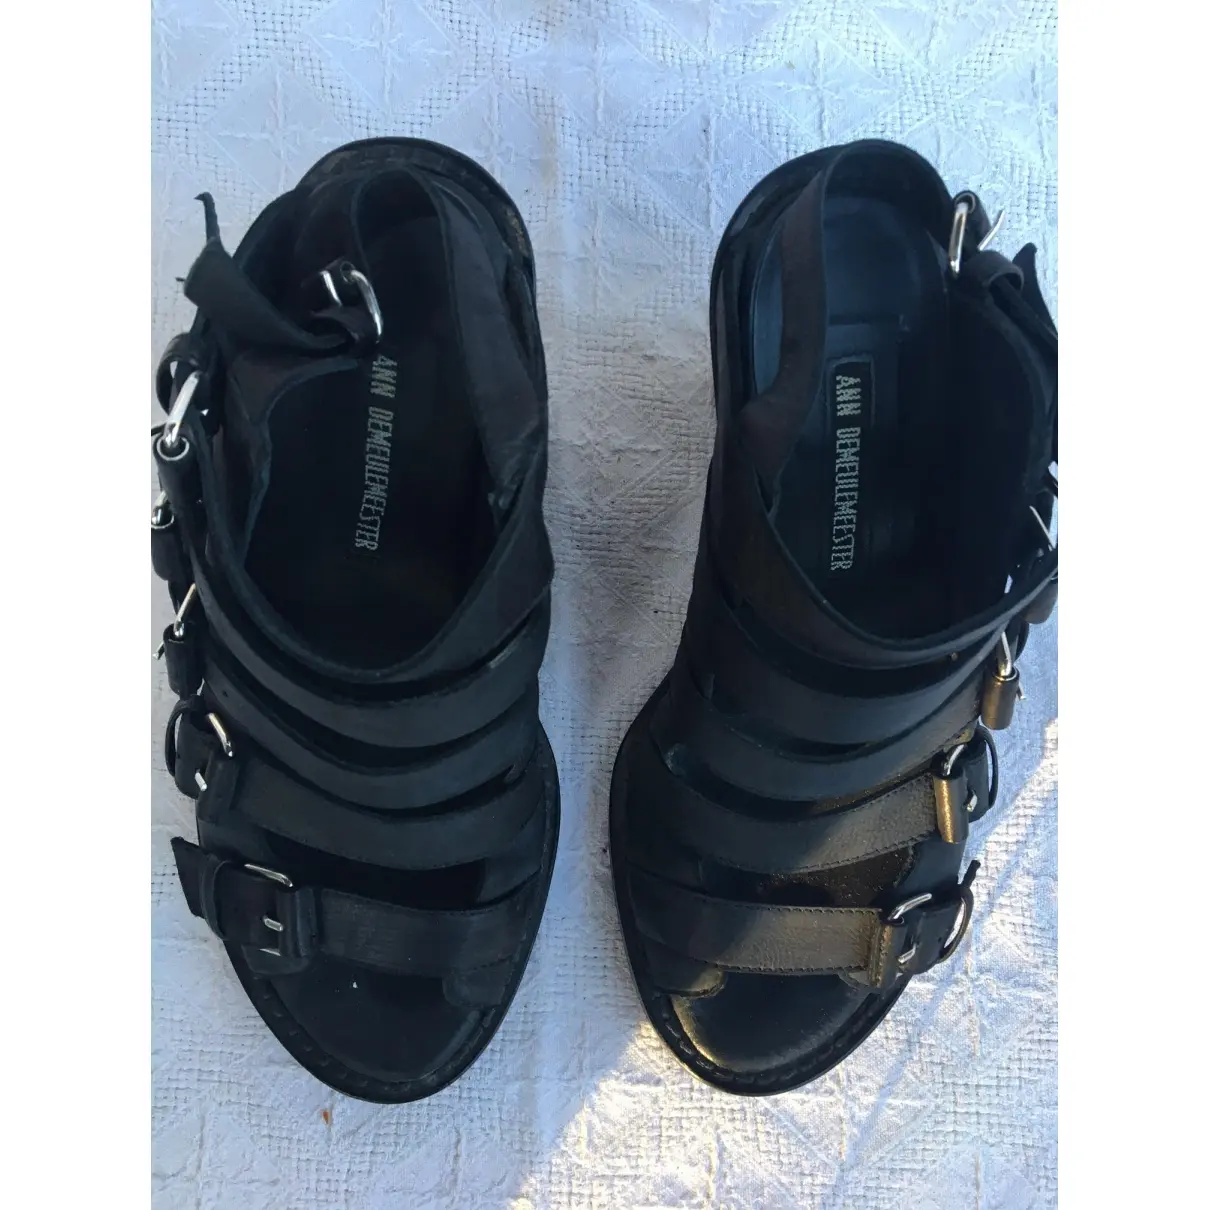 Buy Ann Demeulemeester Leather sandals online